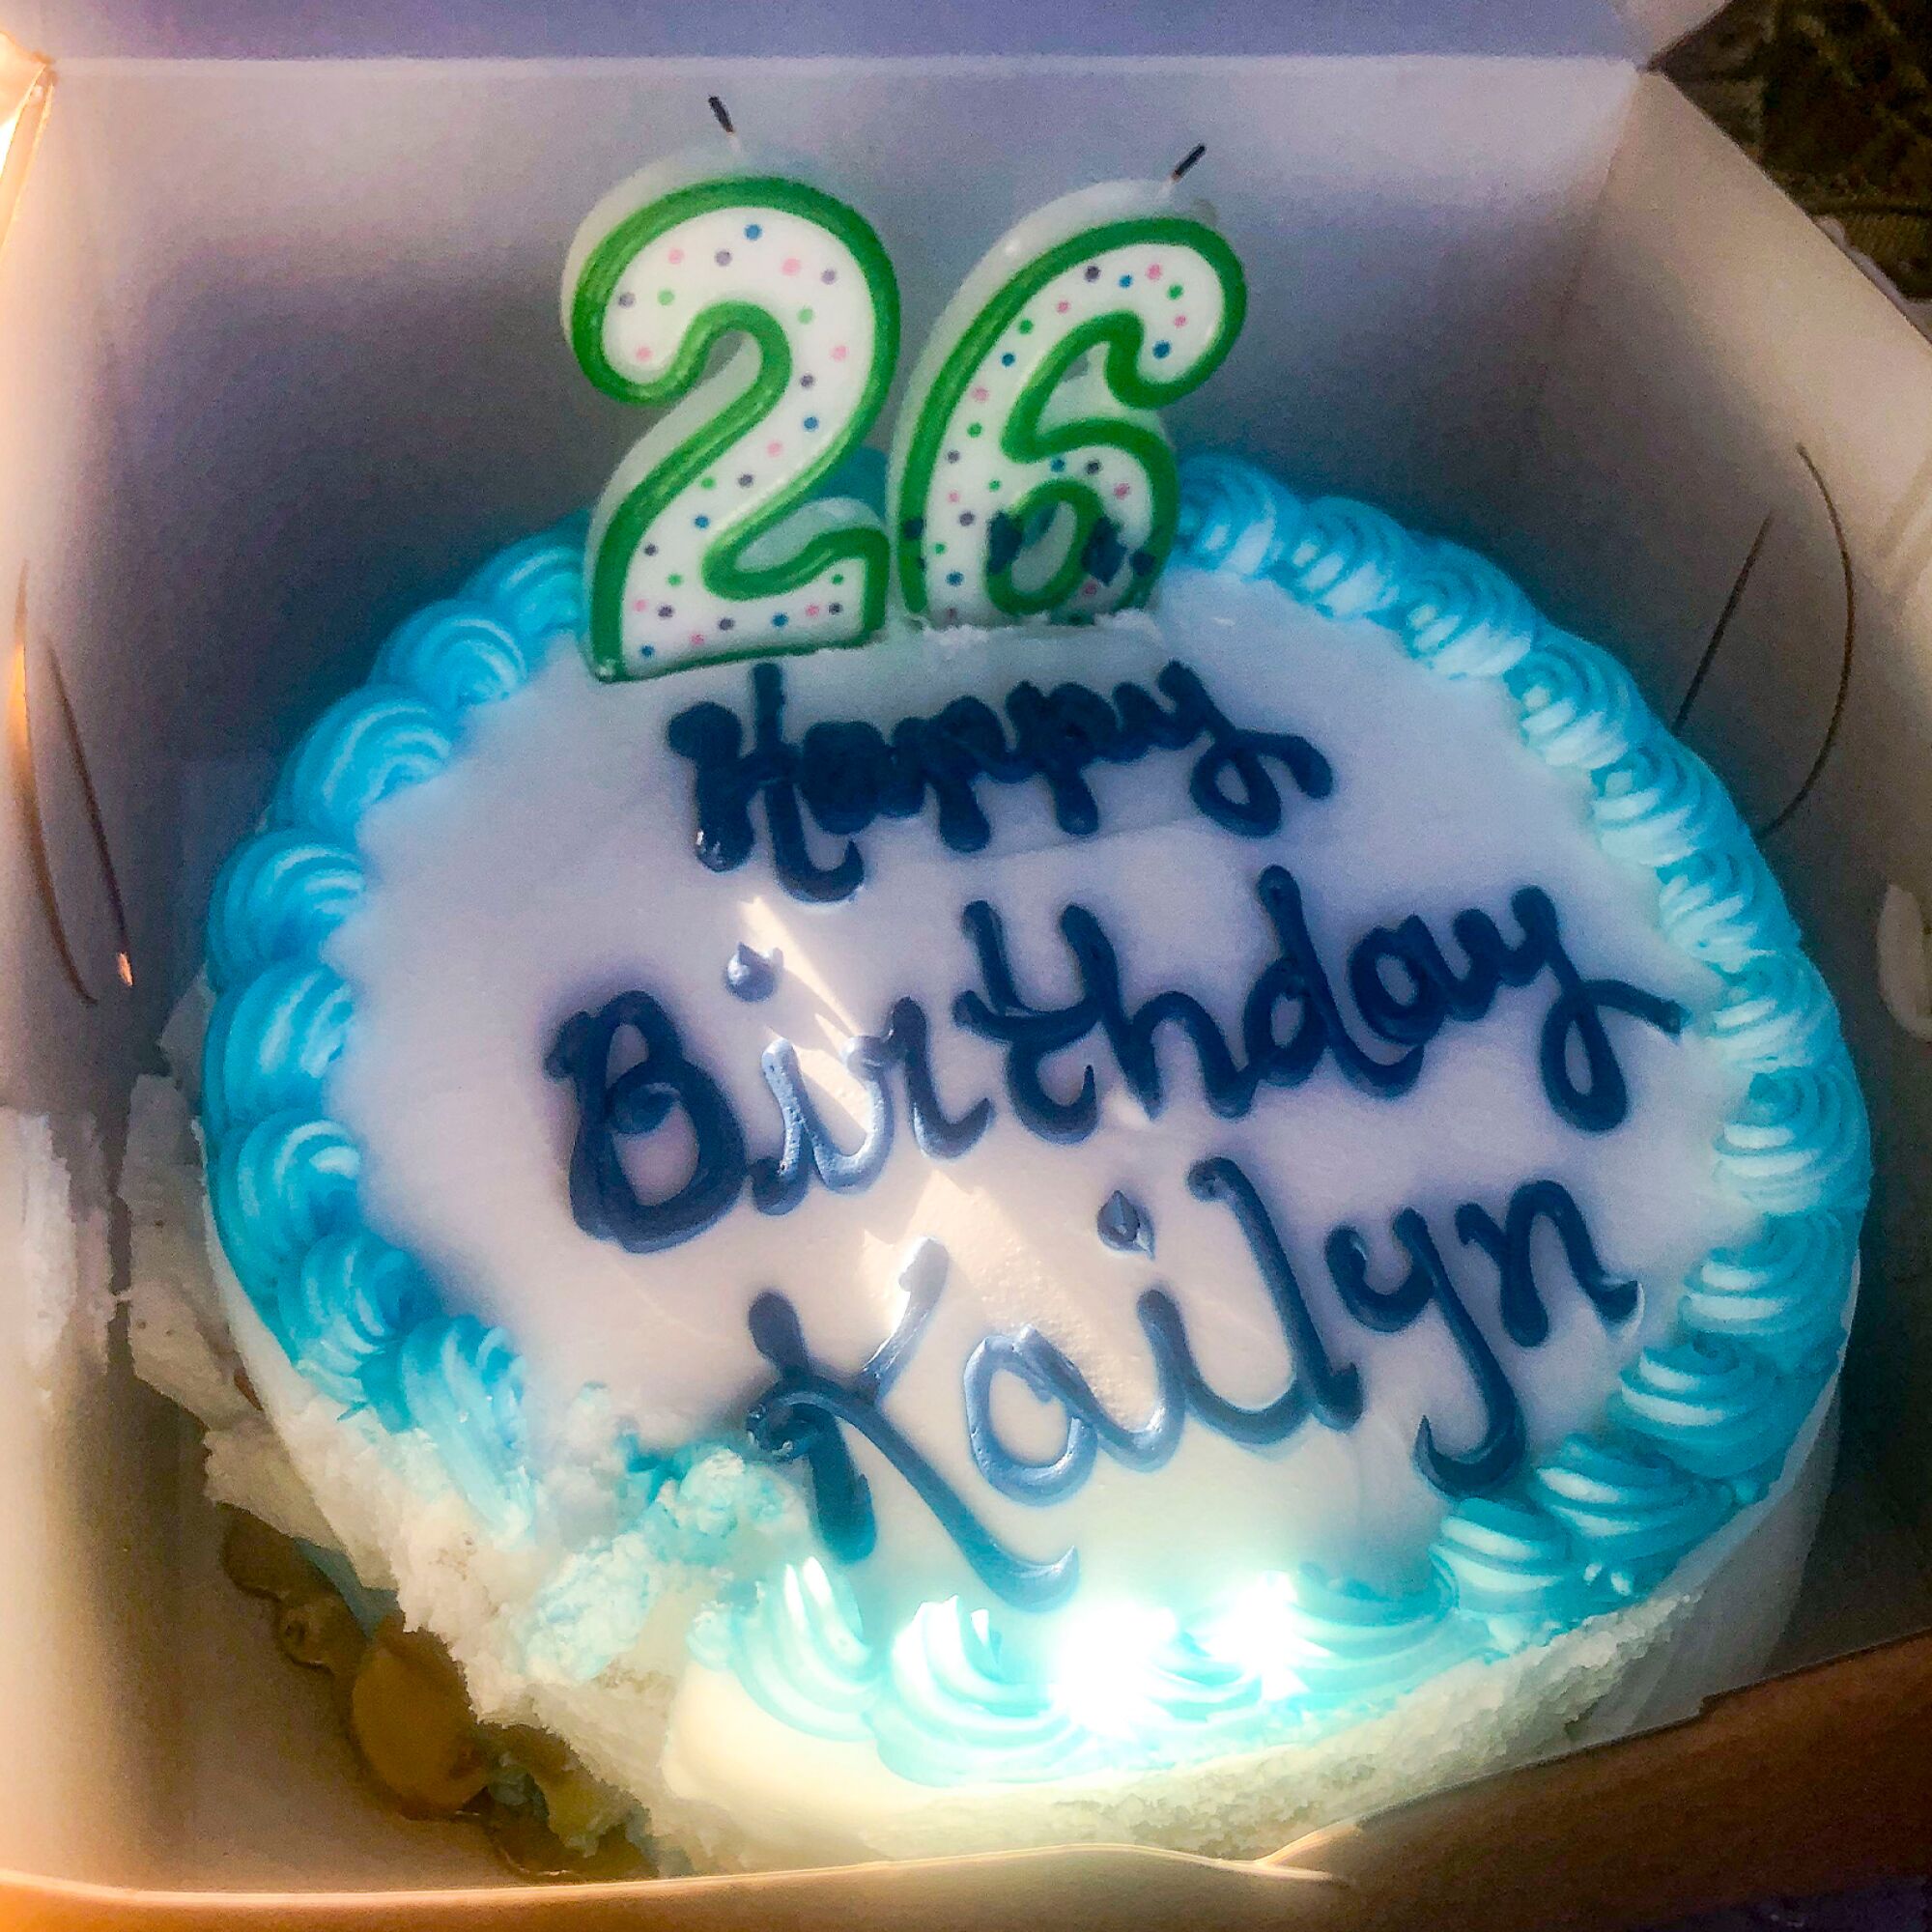 Kailyn Brown's 26th birthday cake with candles.